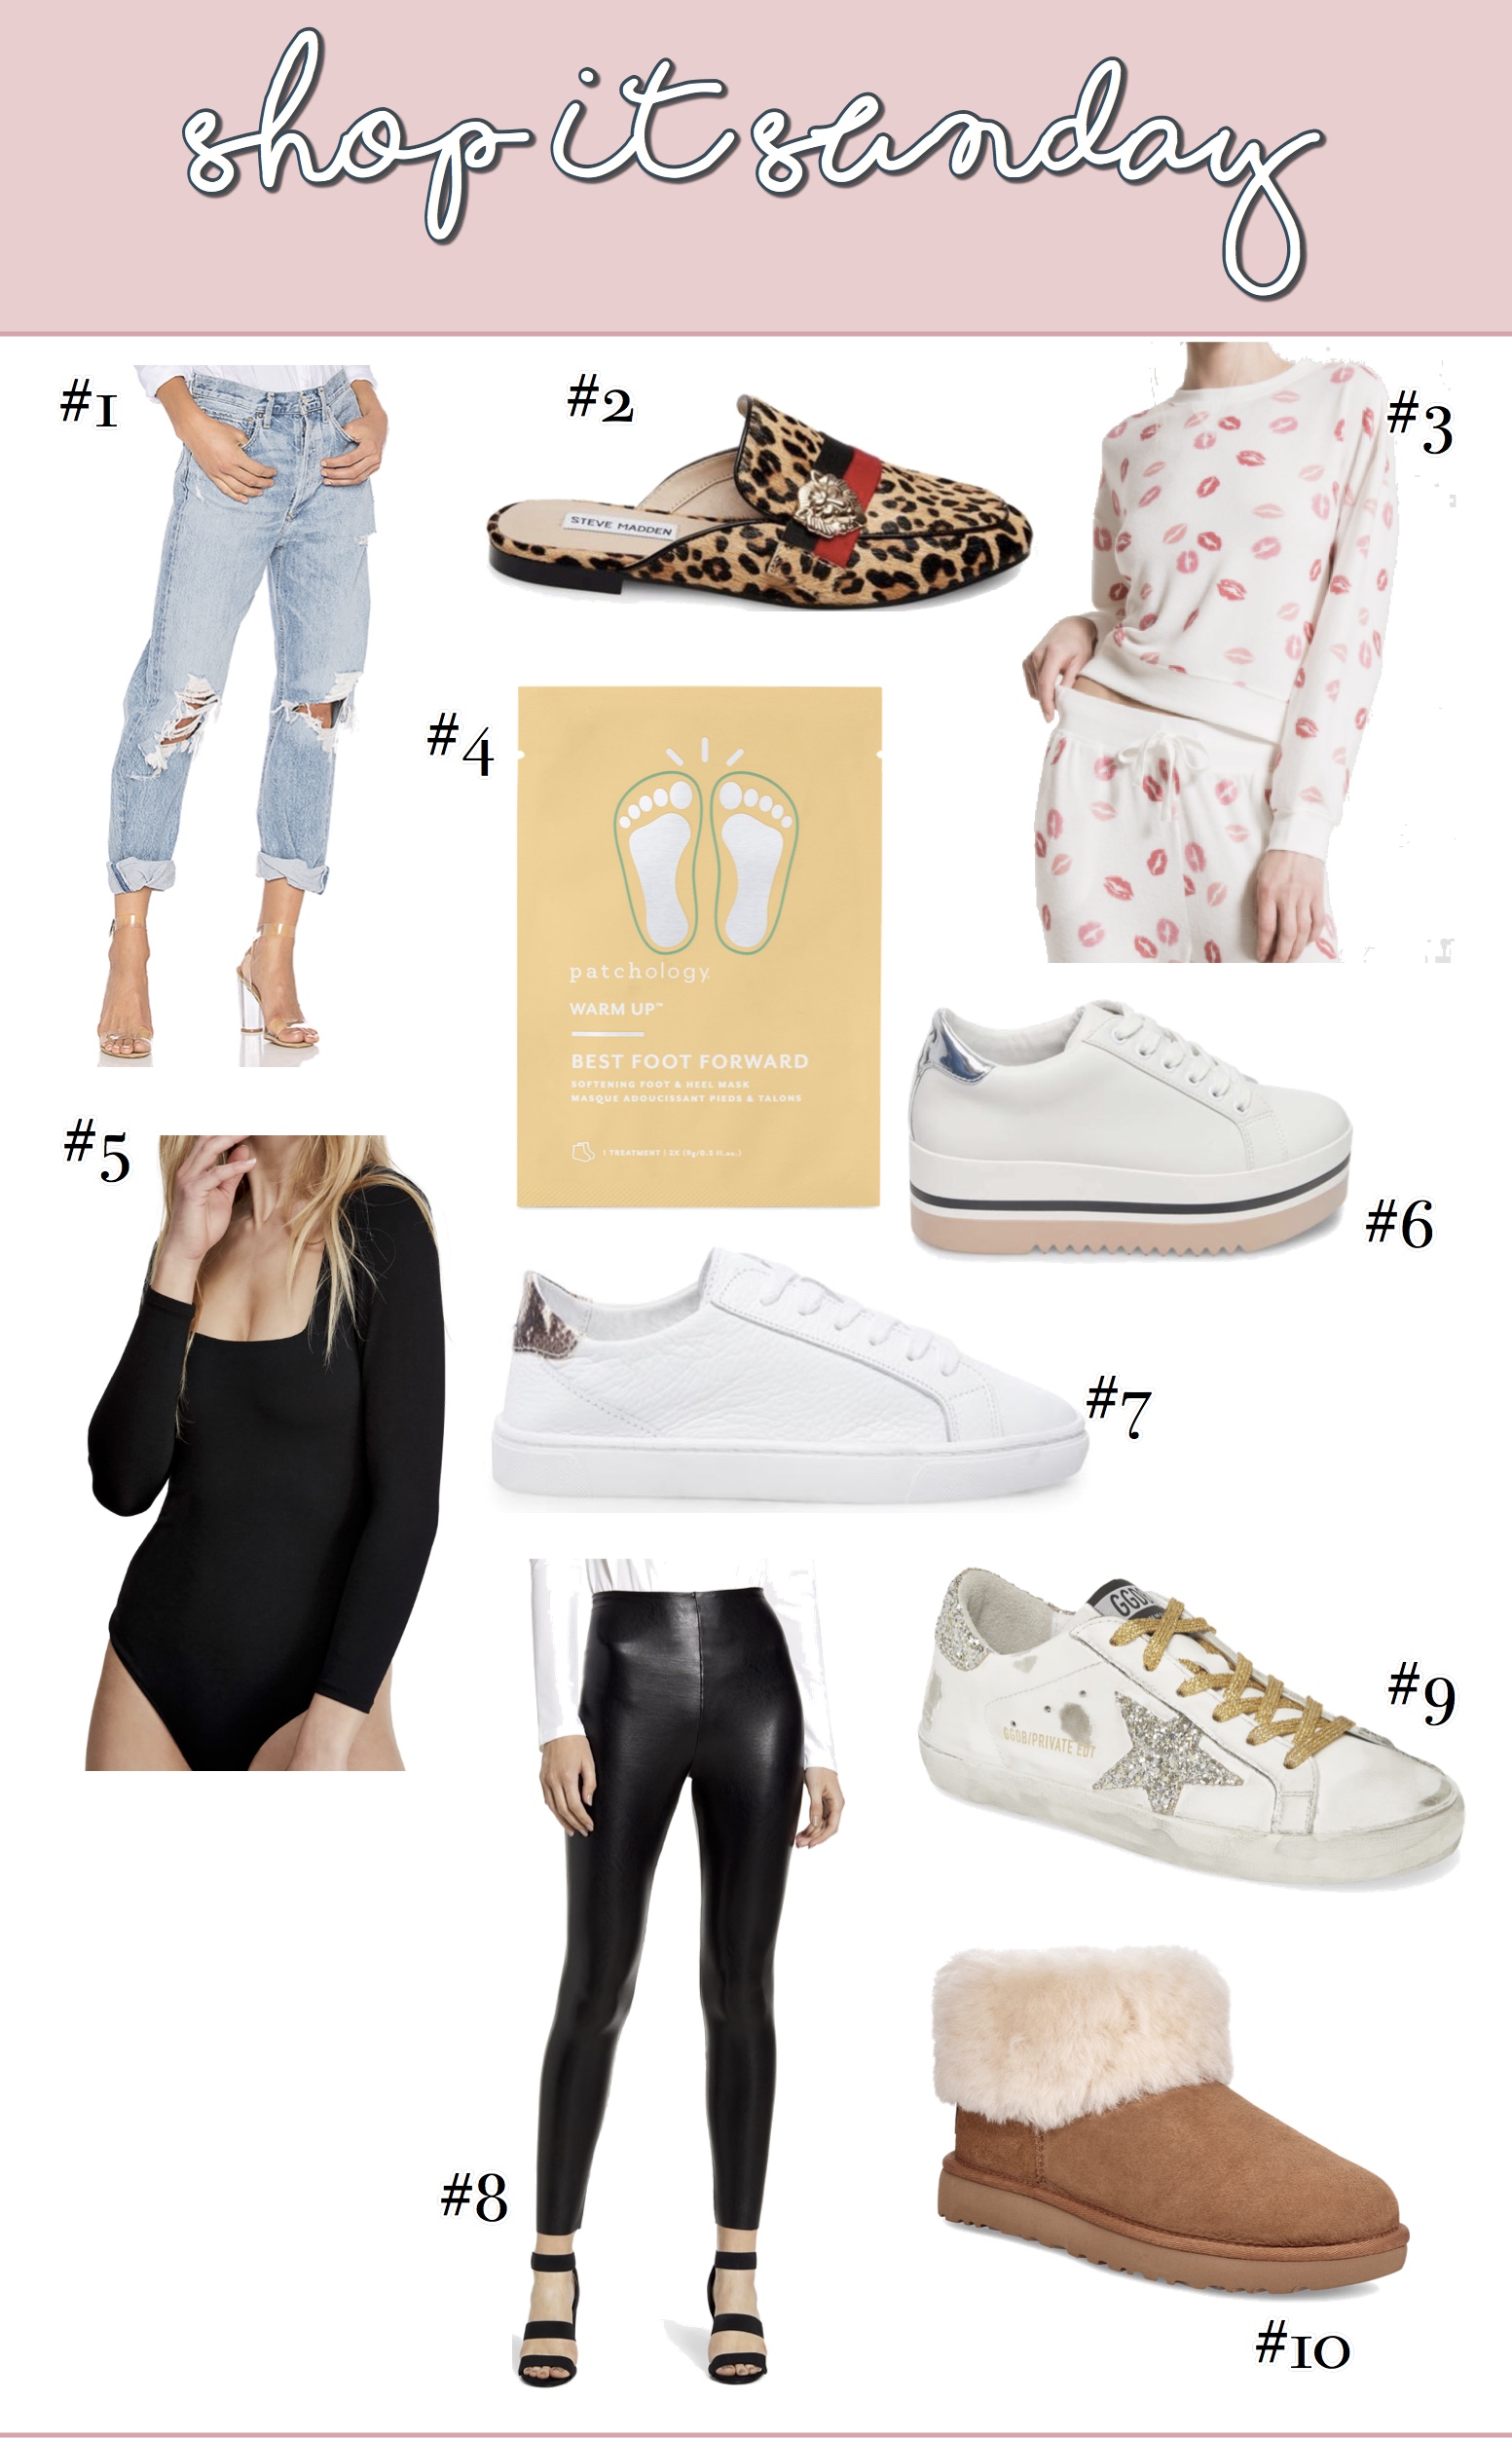 shopitsunday-emilygemma | Shop It Sunday // Readers Favorites From Last Week by popular Oklahoma fashion blog, The Sweetest Thing: image of Agolde jeans, Golden Goose Sneakers, Spanx faux leather leggings, Nordstrom Shearling bootie, black bodysuit, Lips loungewear pullover and drawstring pants, Patchology foot and heel mask, Steve Madden Platform sneakers, Steve Madden white sneakers with snake print,  and Steve Madden leopard slides. 